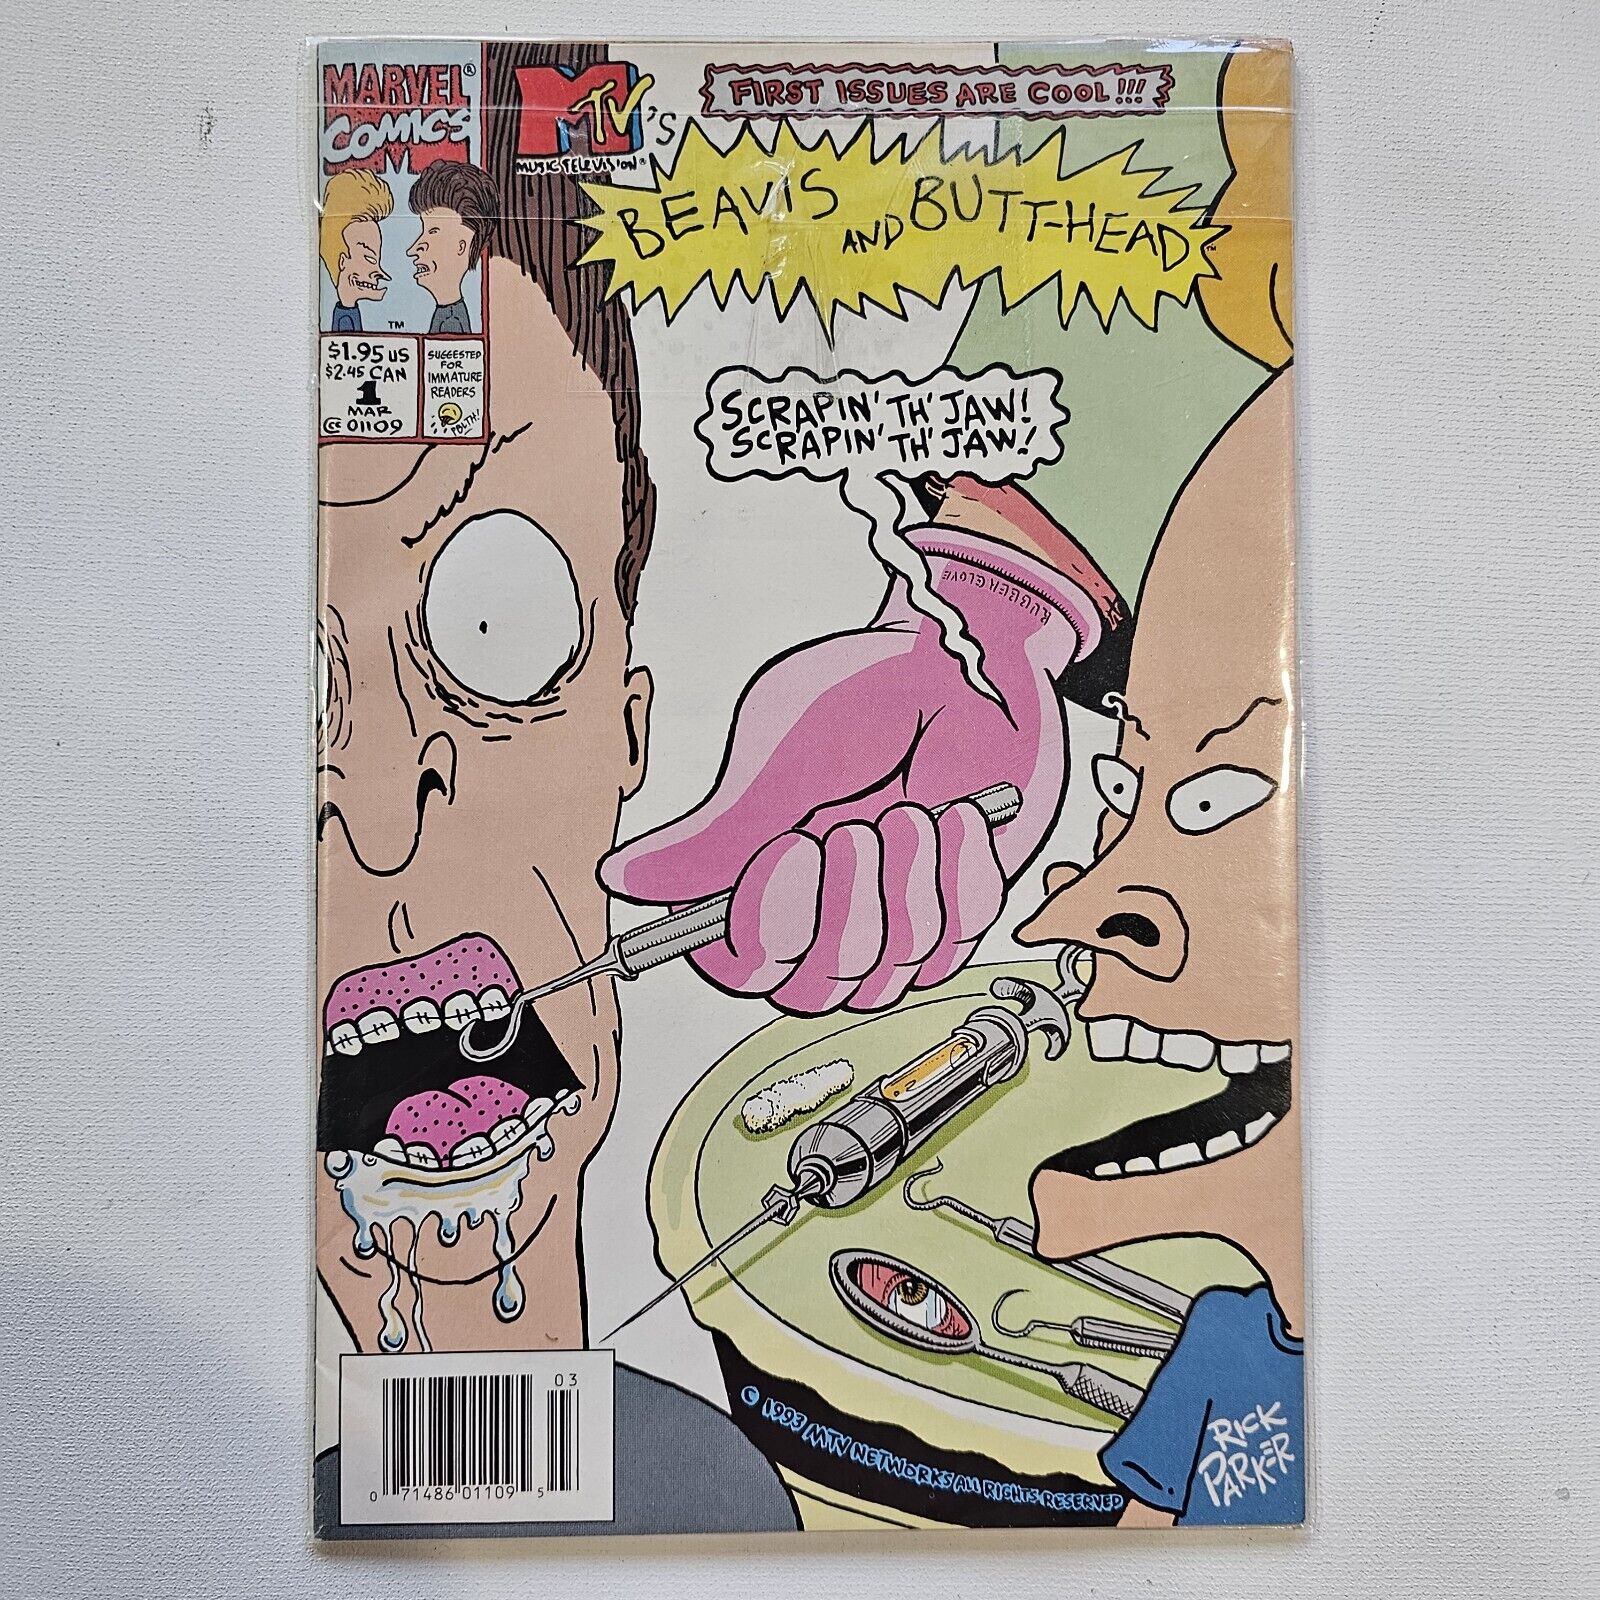 MTV's Beavis and Butt-Head #1 (Mar 1994) • First Printing • Great Condition